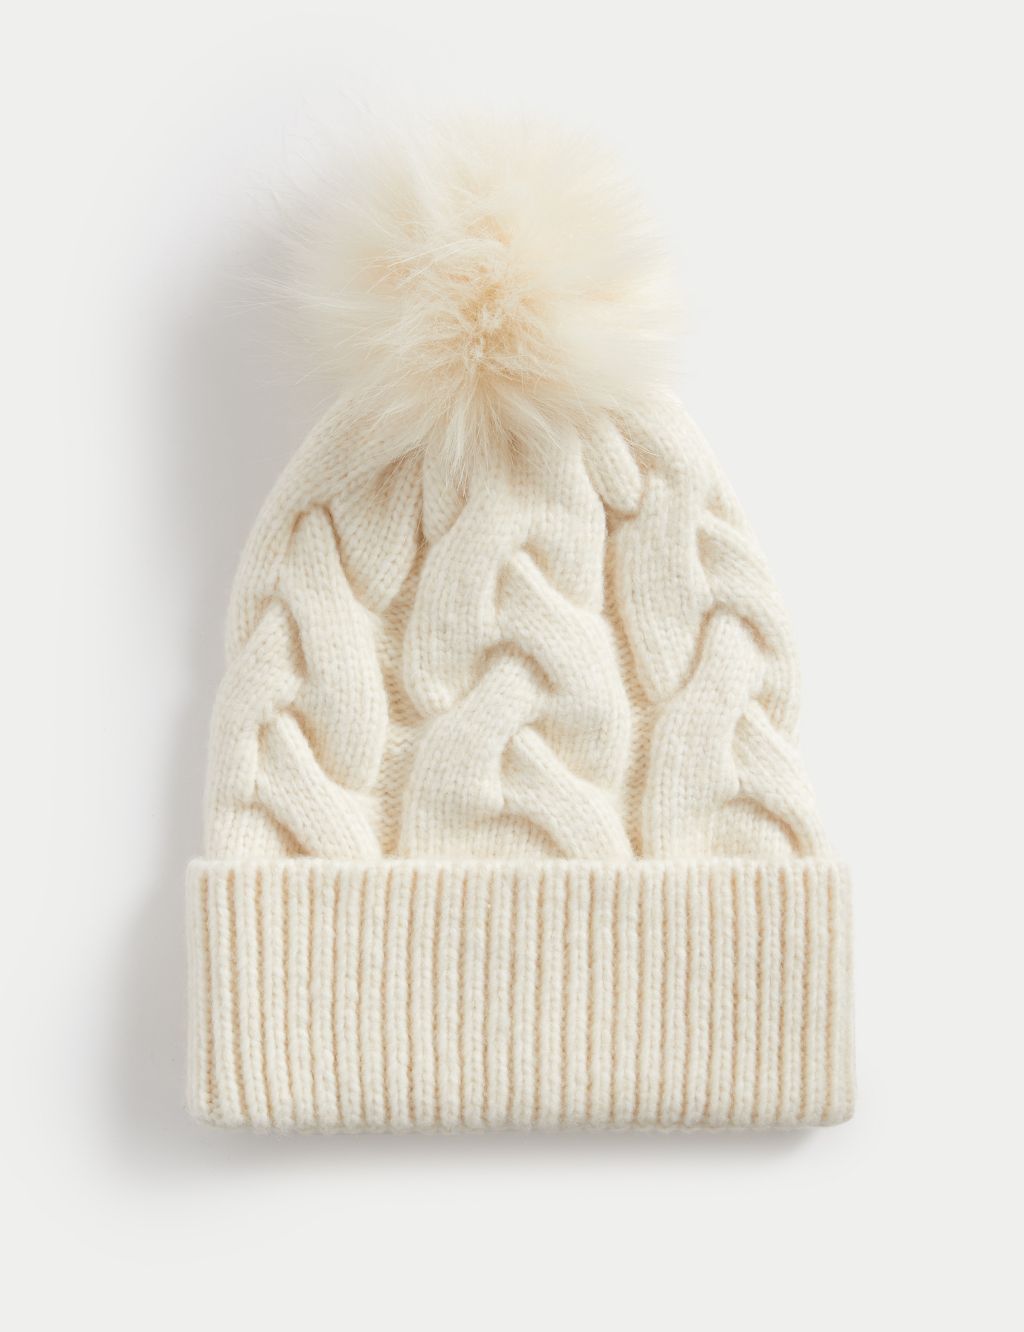 Knitted Cable Faux Fur Pom Hat image 1